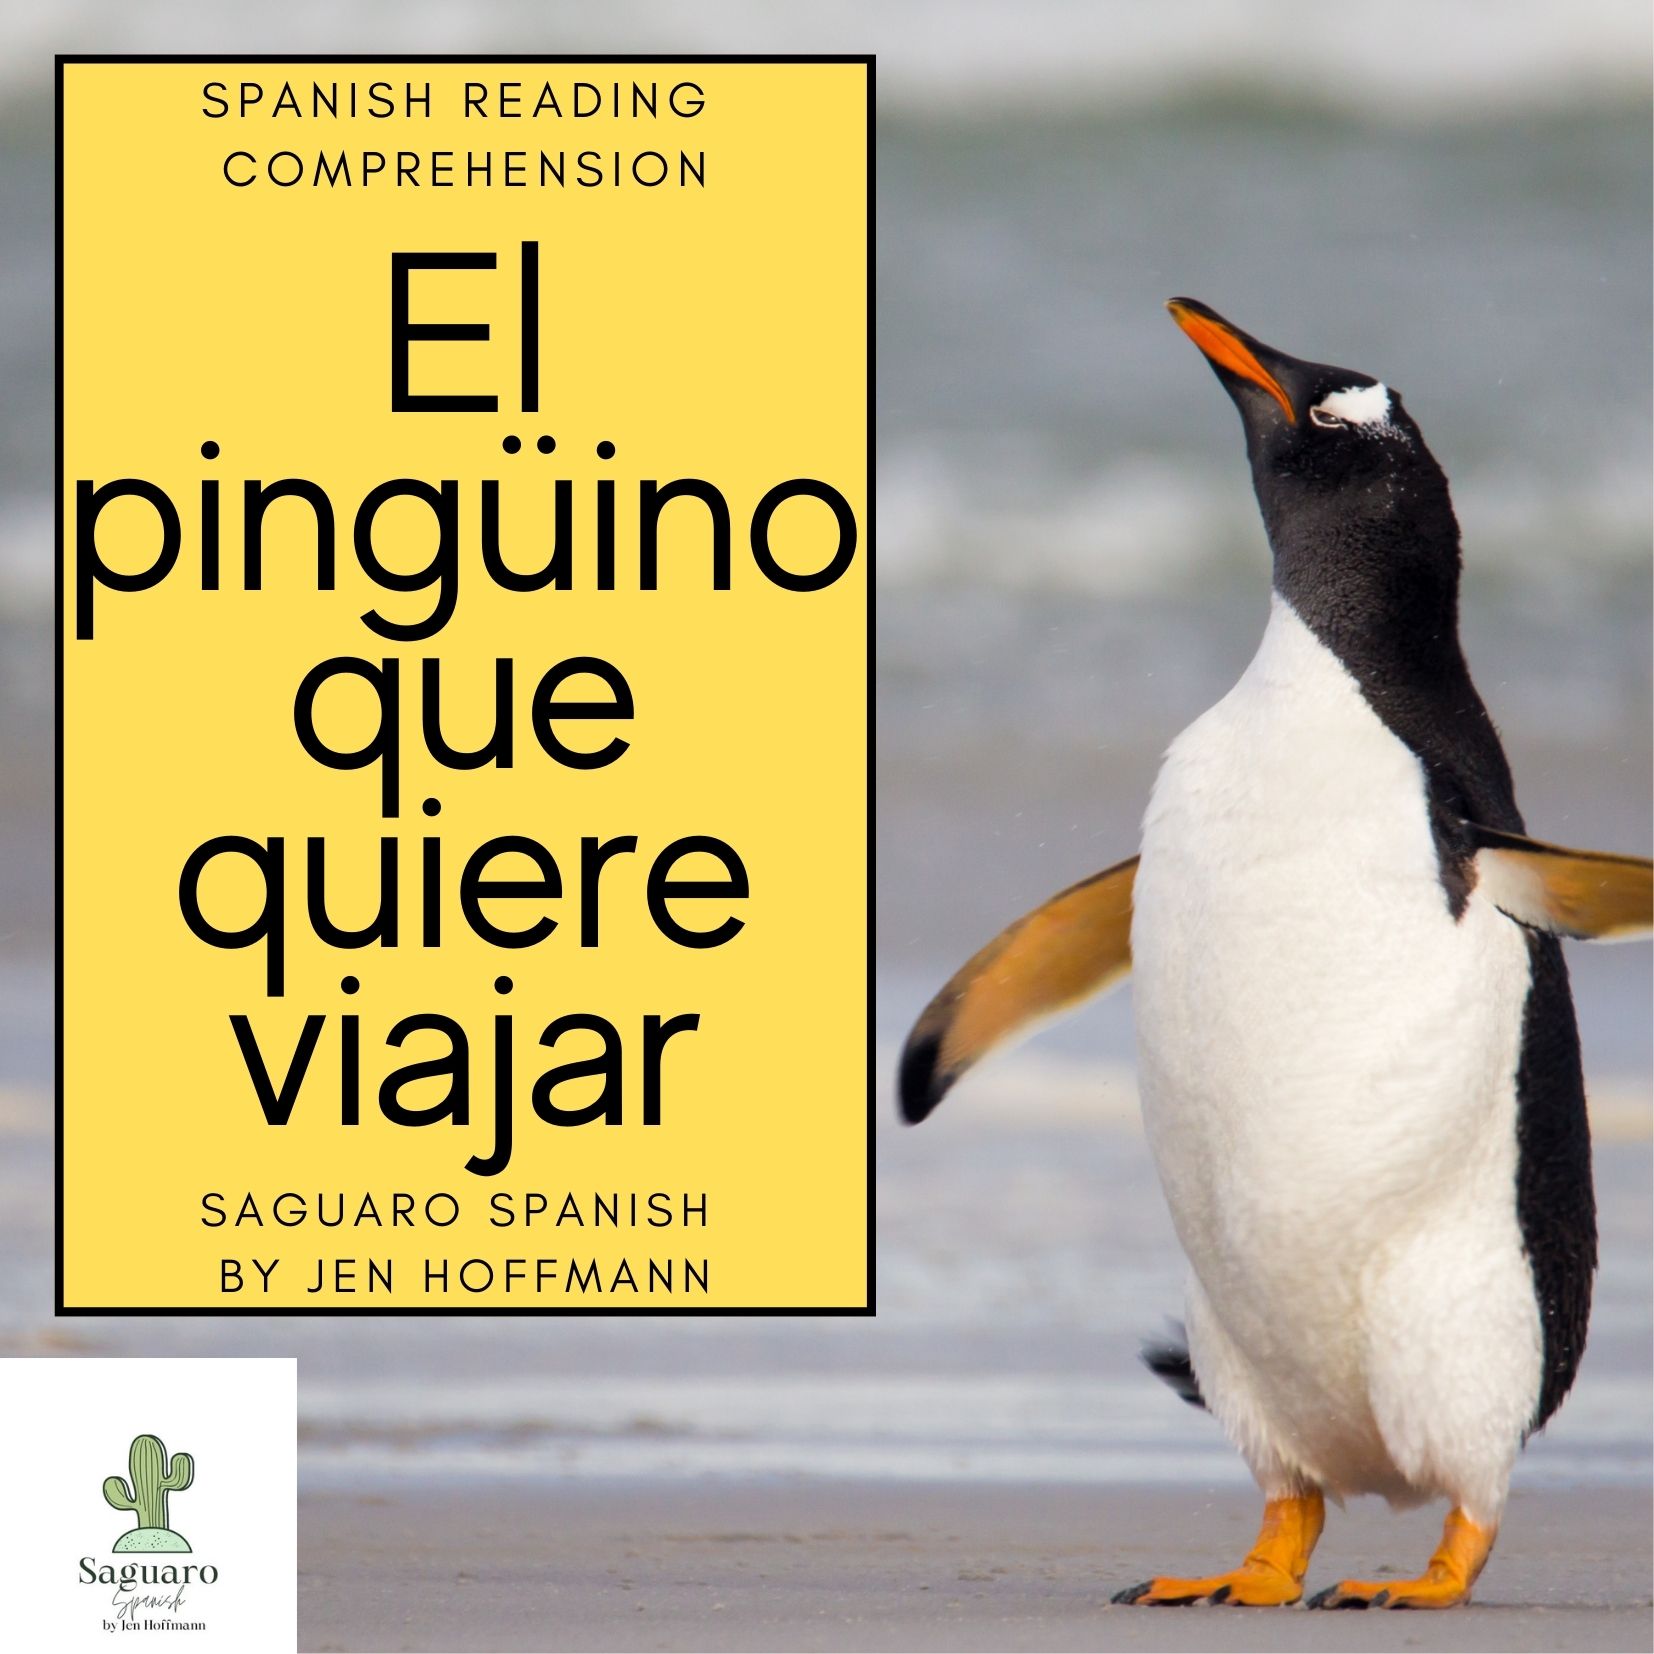 Spanish (CI) Reading Comprehension Story and Worksheet : El pingüino (poder, querer)'s featured image